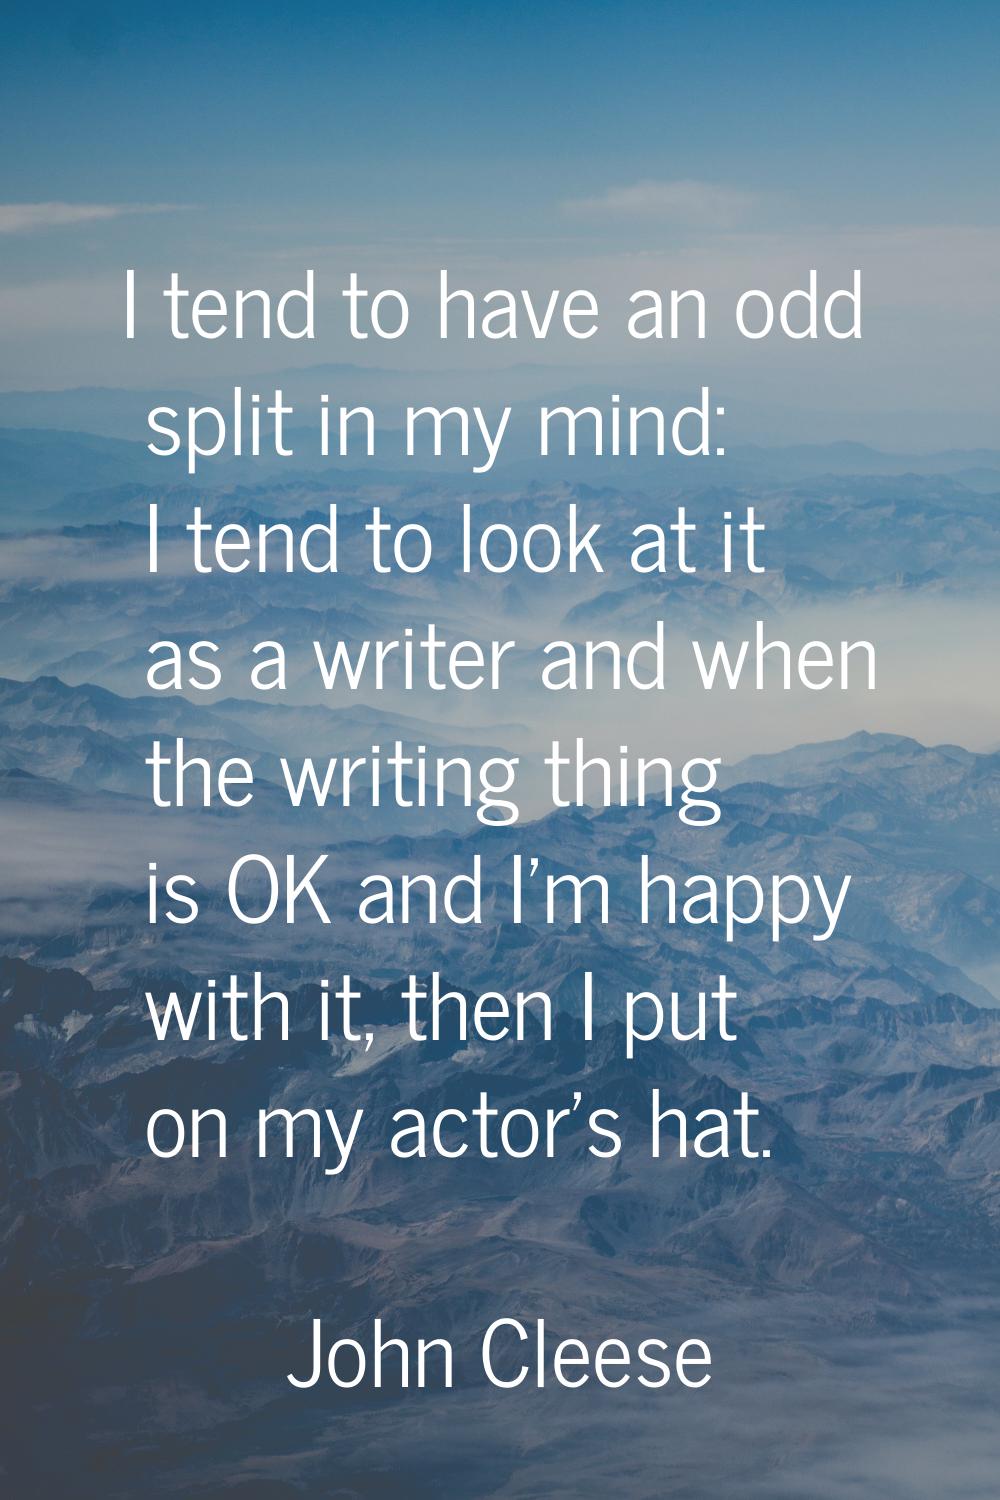 I tend to have an odd split in my mind: I tend to look at it as a writer and when the writing thing